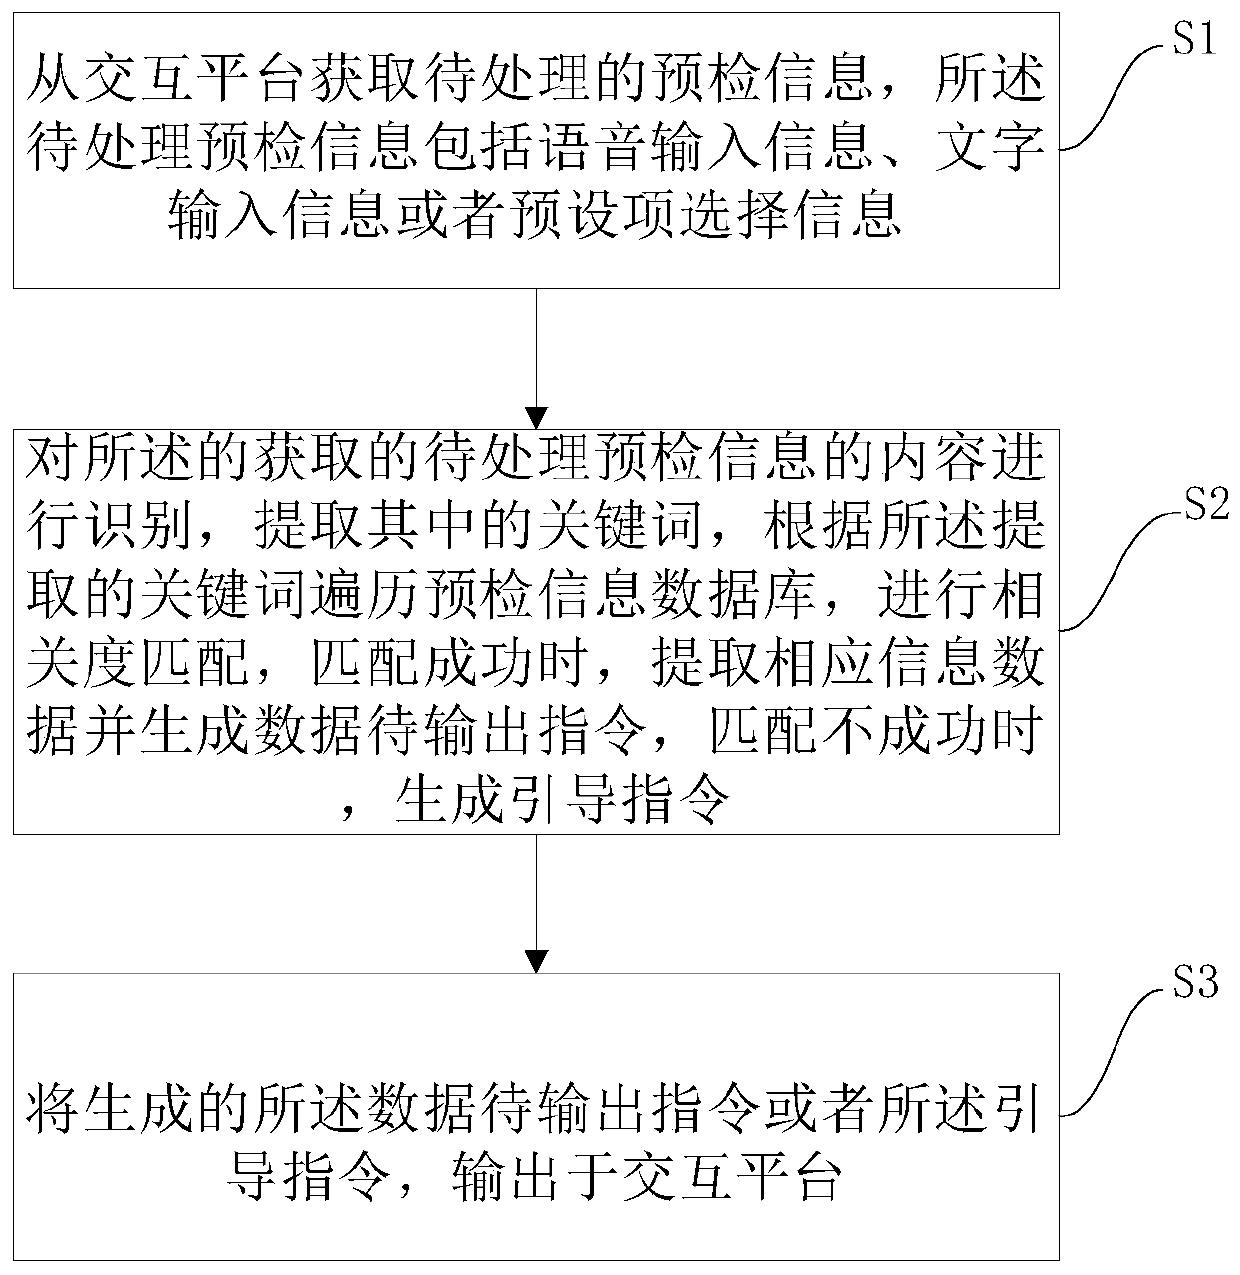 Pre-examination information interaction method based on data analysis and related equipment